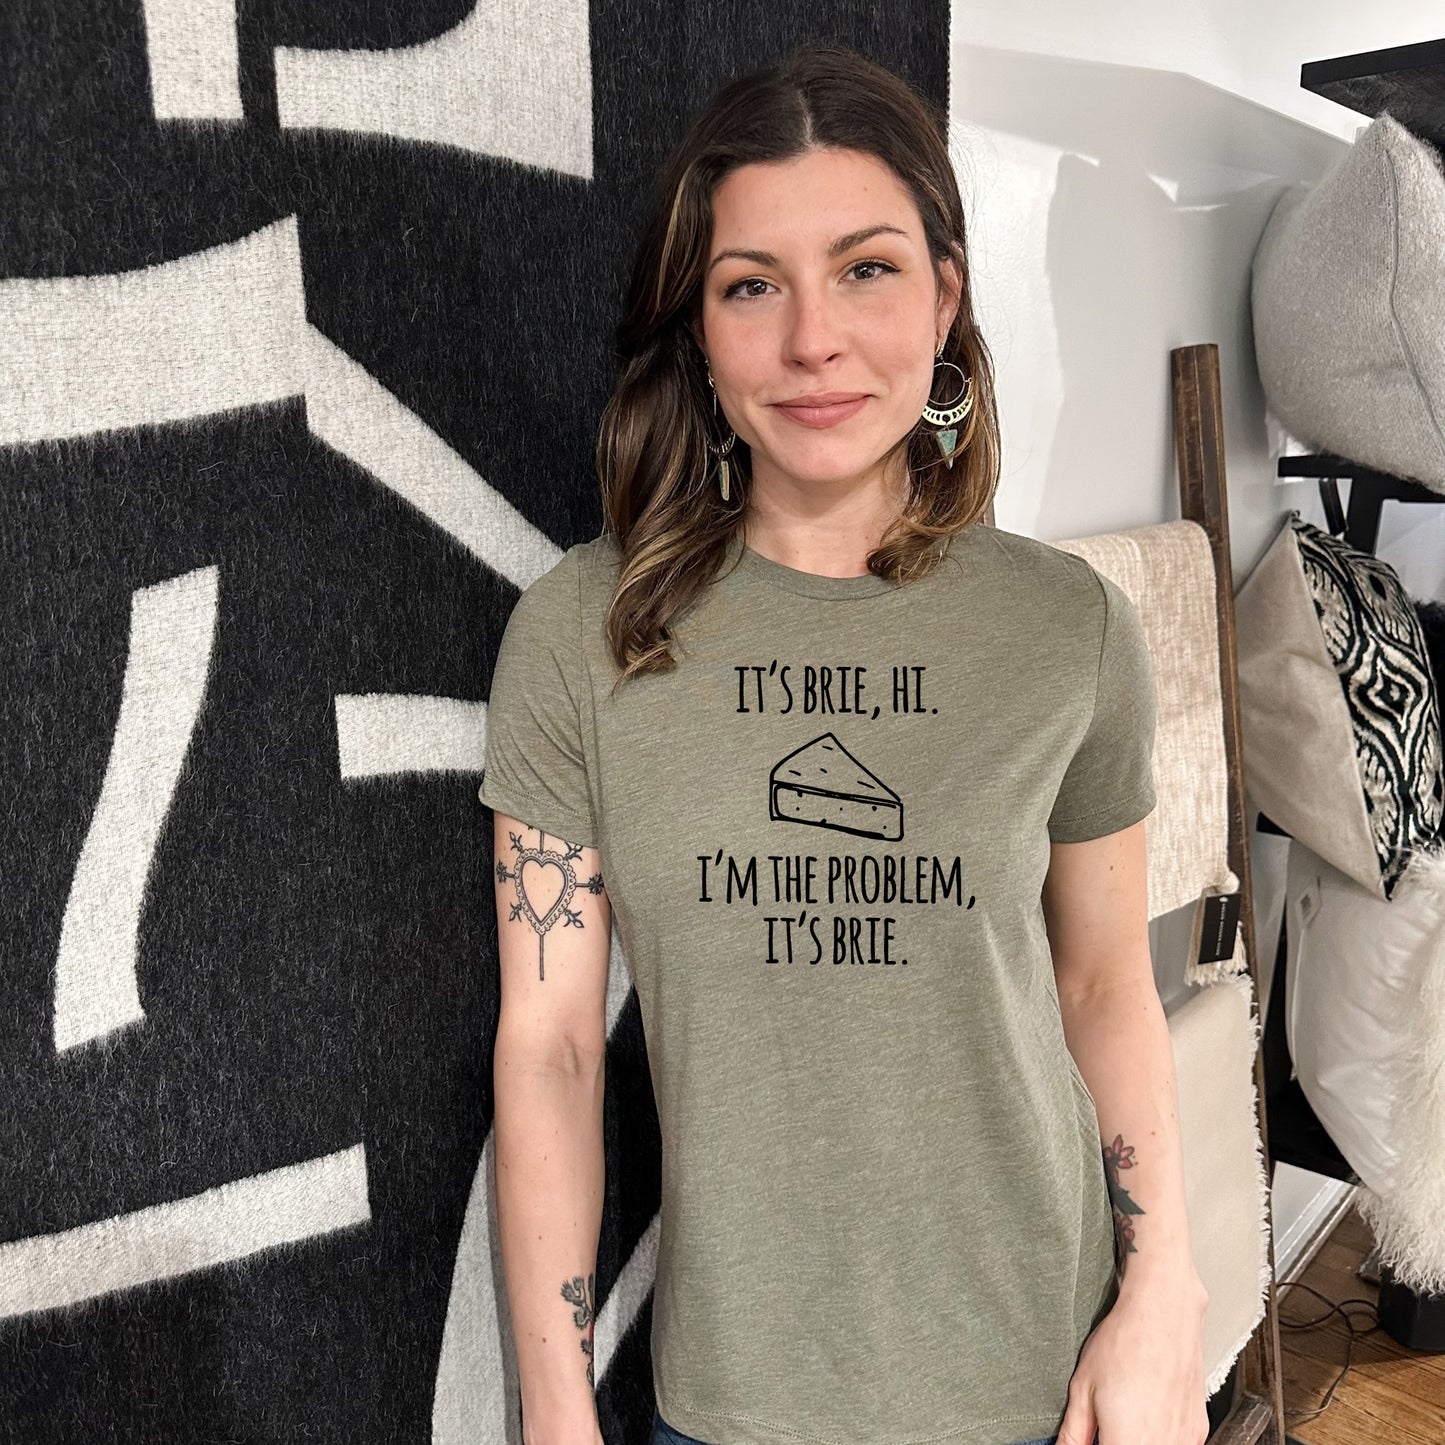 It's Brie, Hi. I'm The Problem, It's Brie - Women's Crew Tee - Olive or Dusty Blue